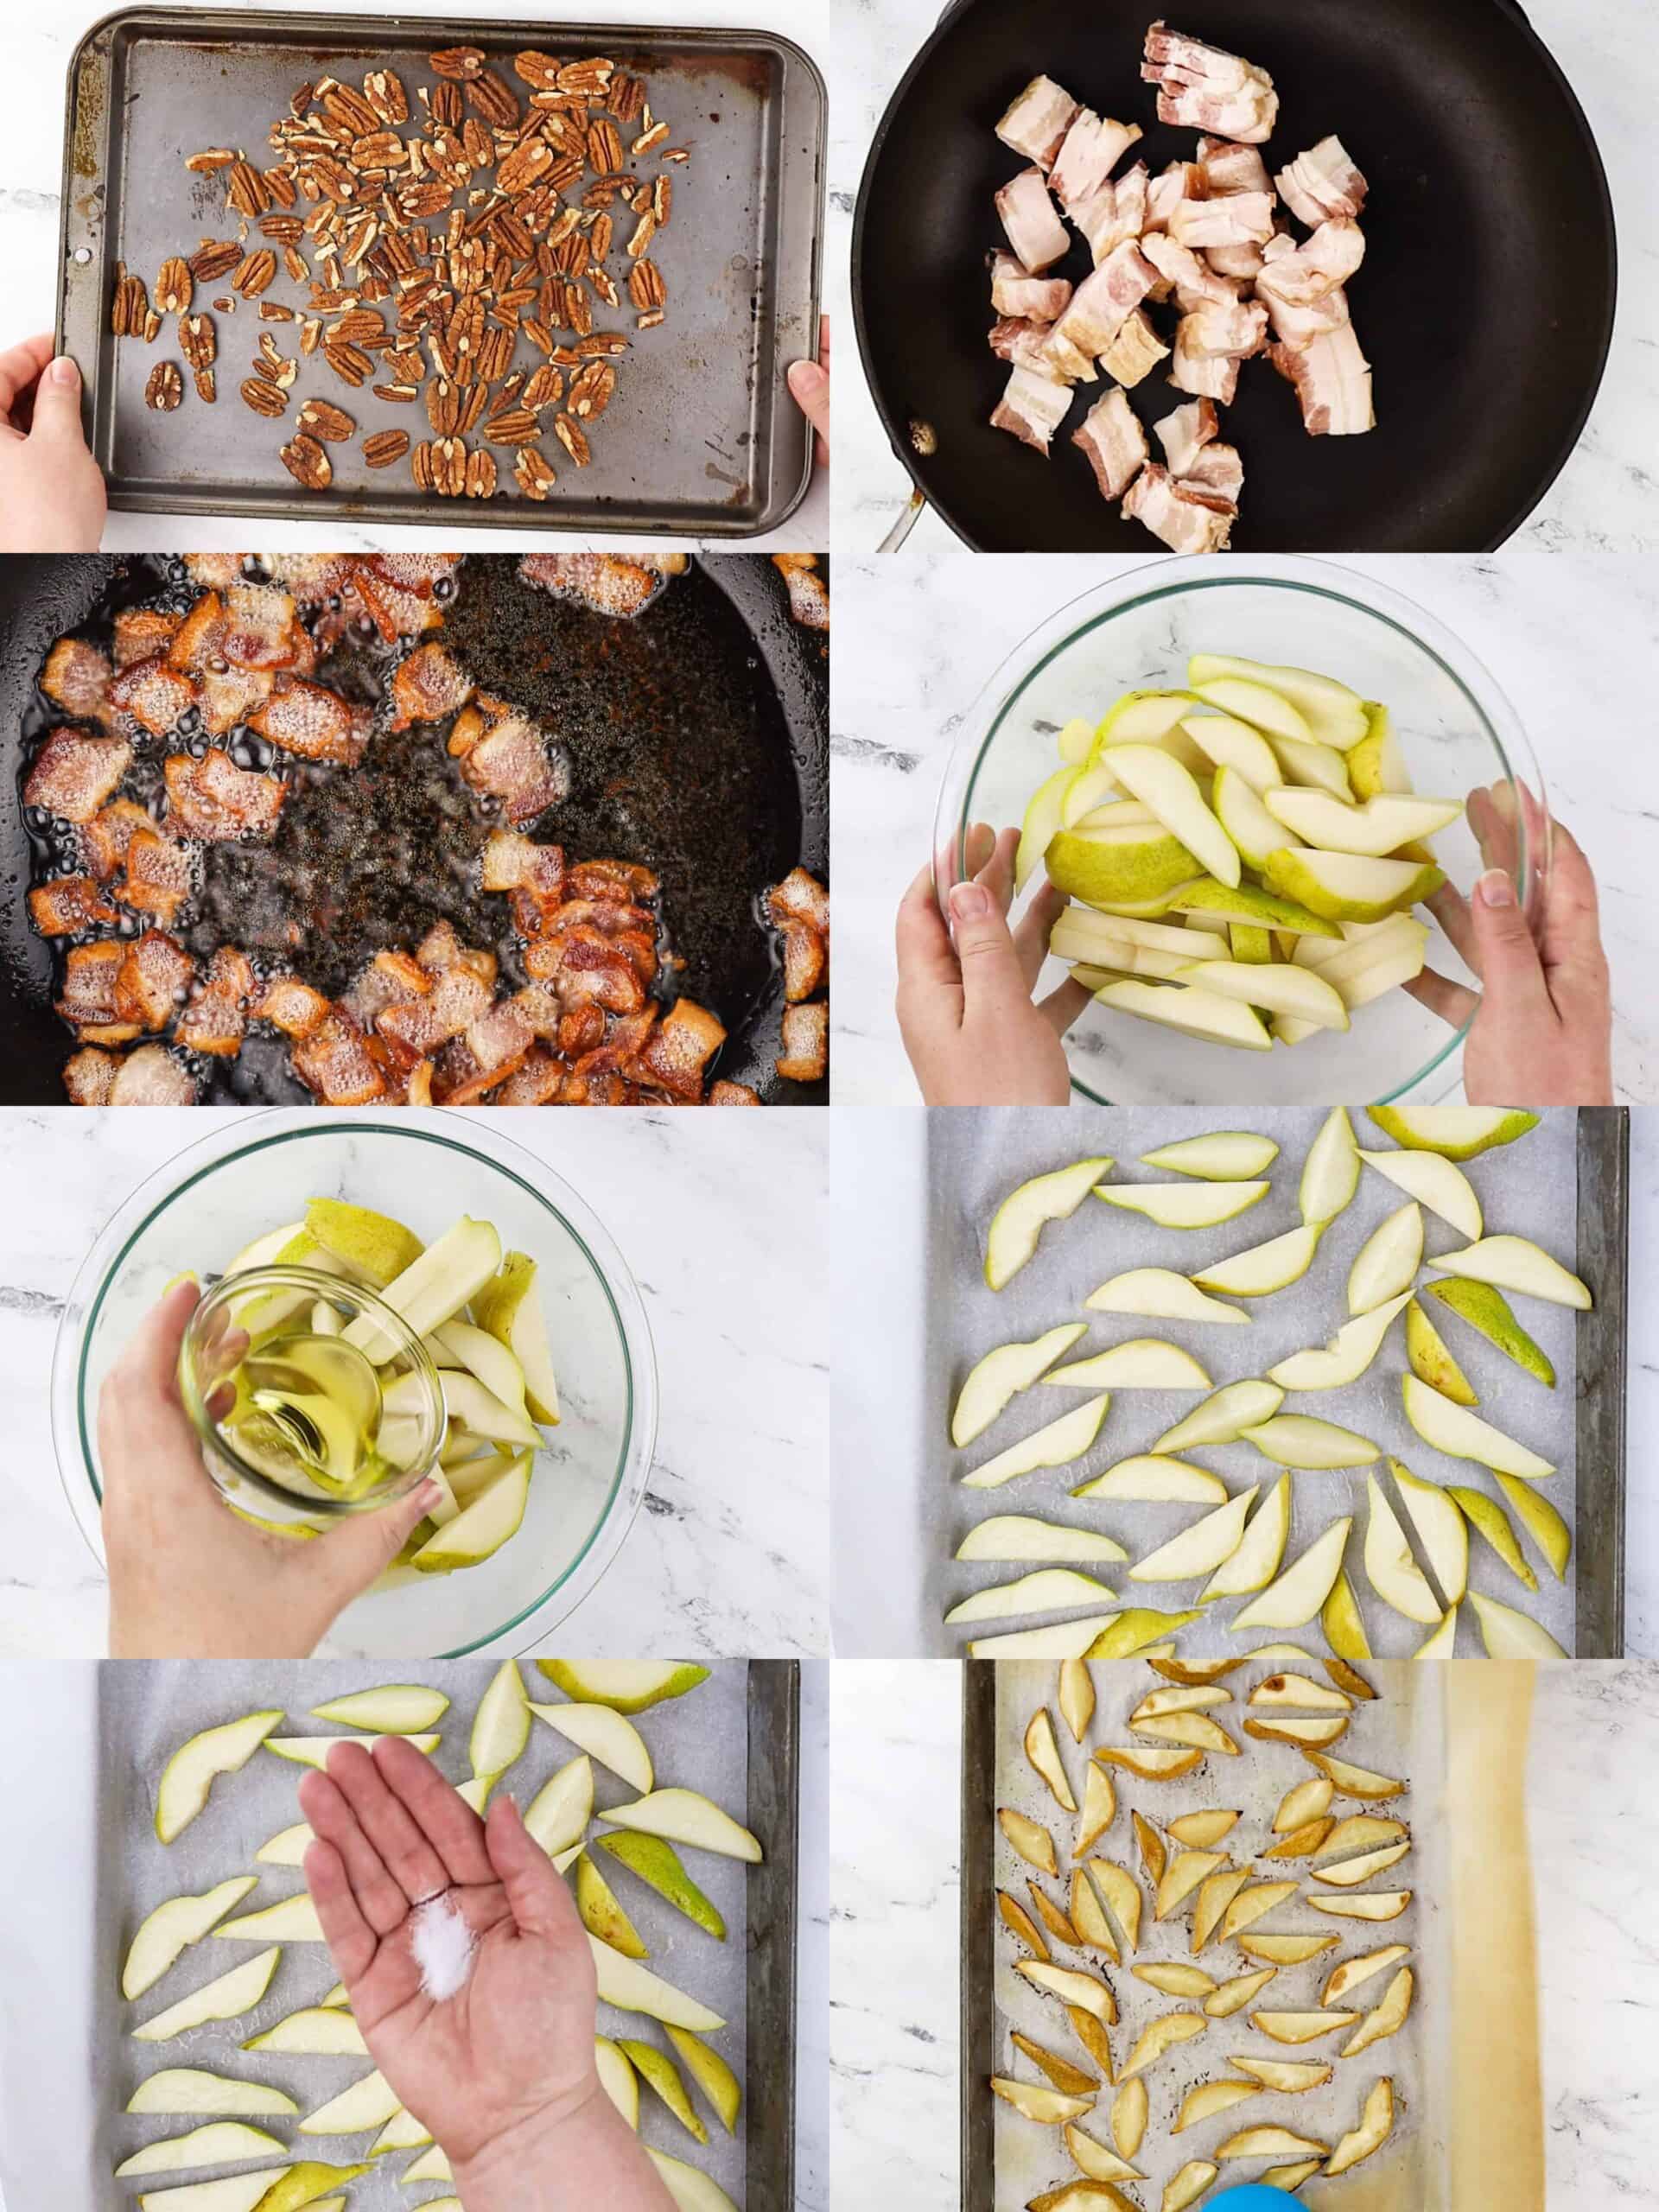 Process shots of how to make the salad